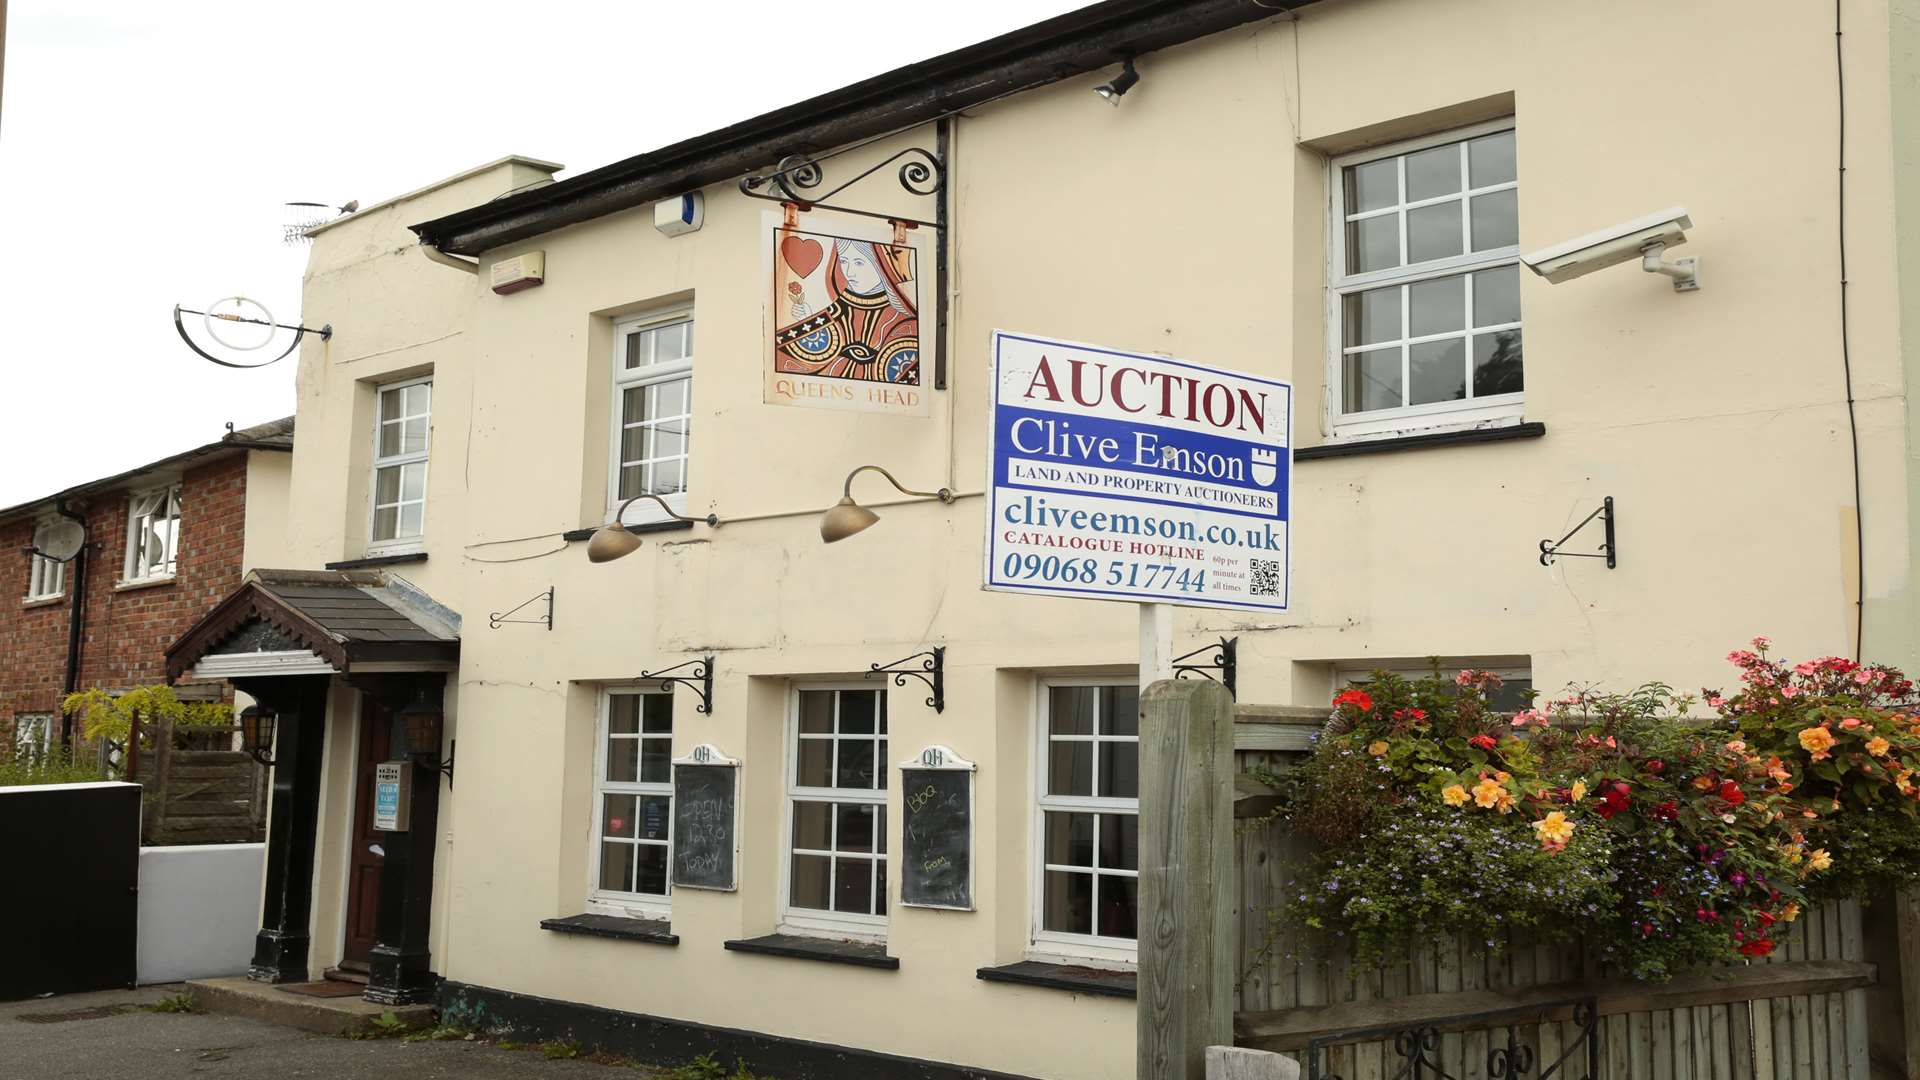 The pub, which has been closed, is being auctioned